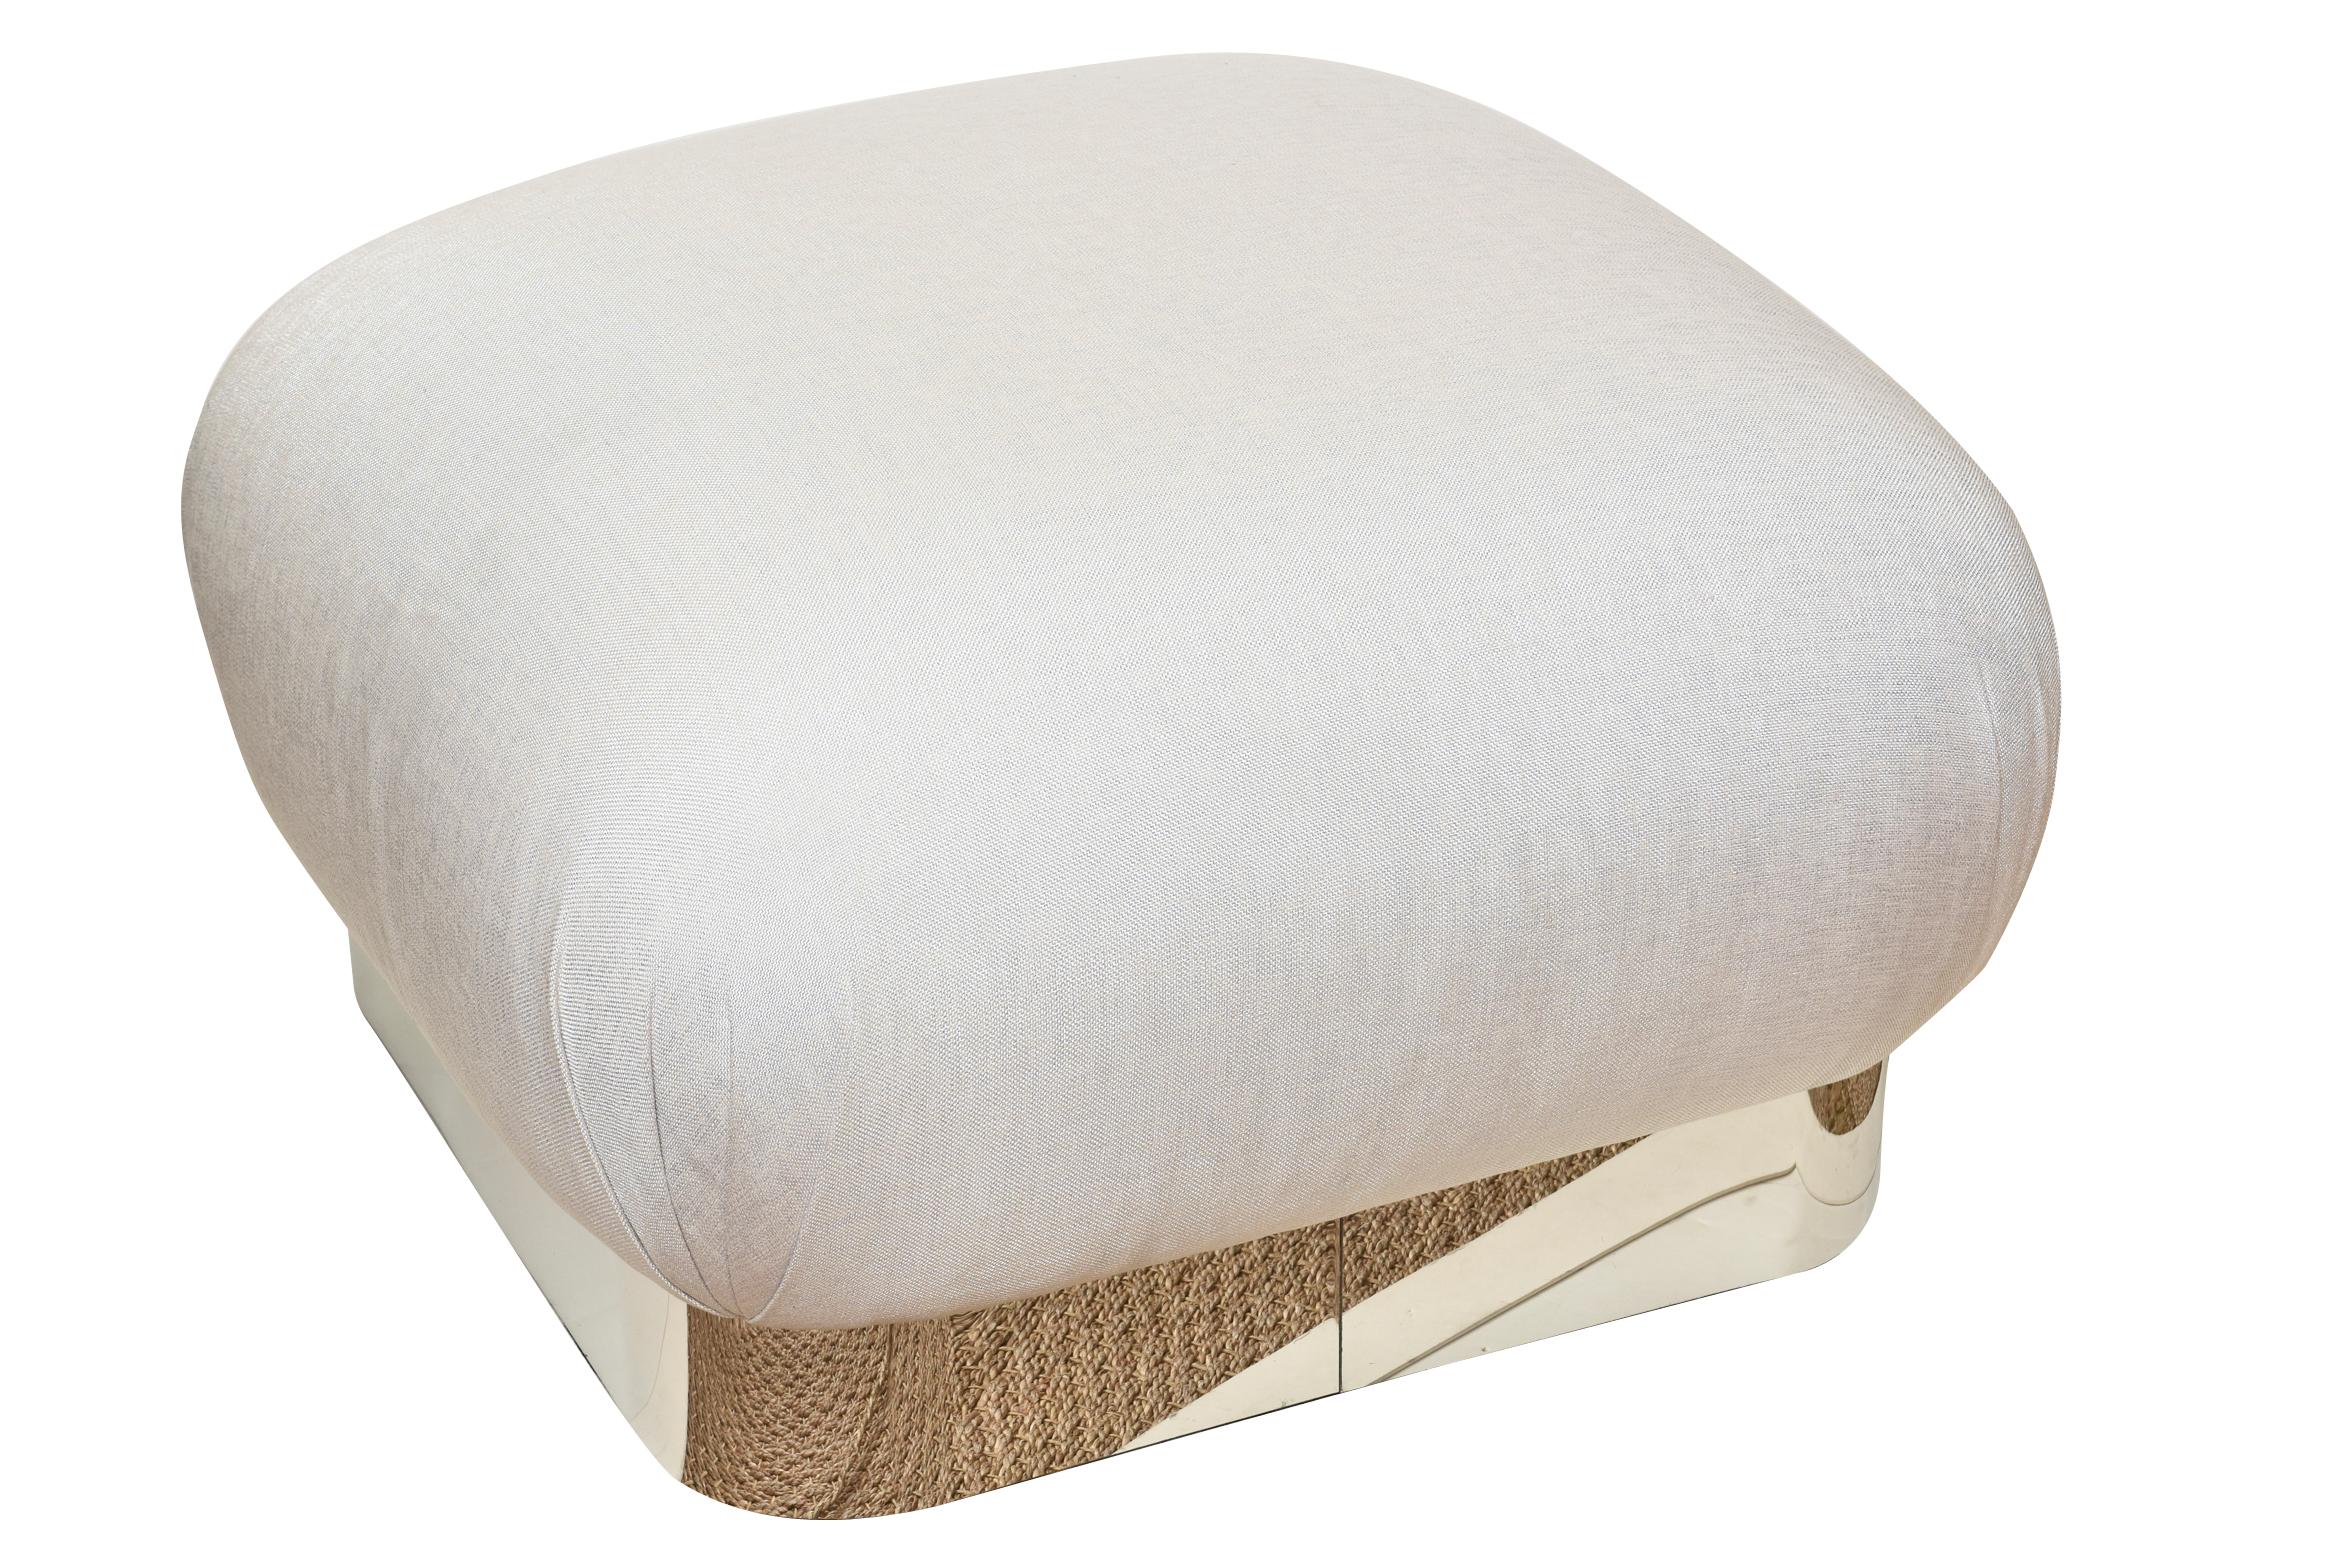 Modern Vintage Karl Springer Large Stainless Steel and Upholstered Souffle Pouf Ottoman For Sale